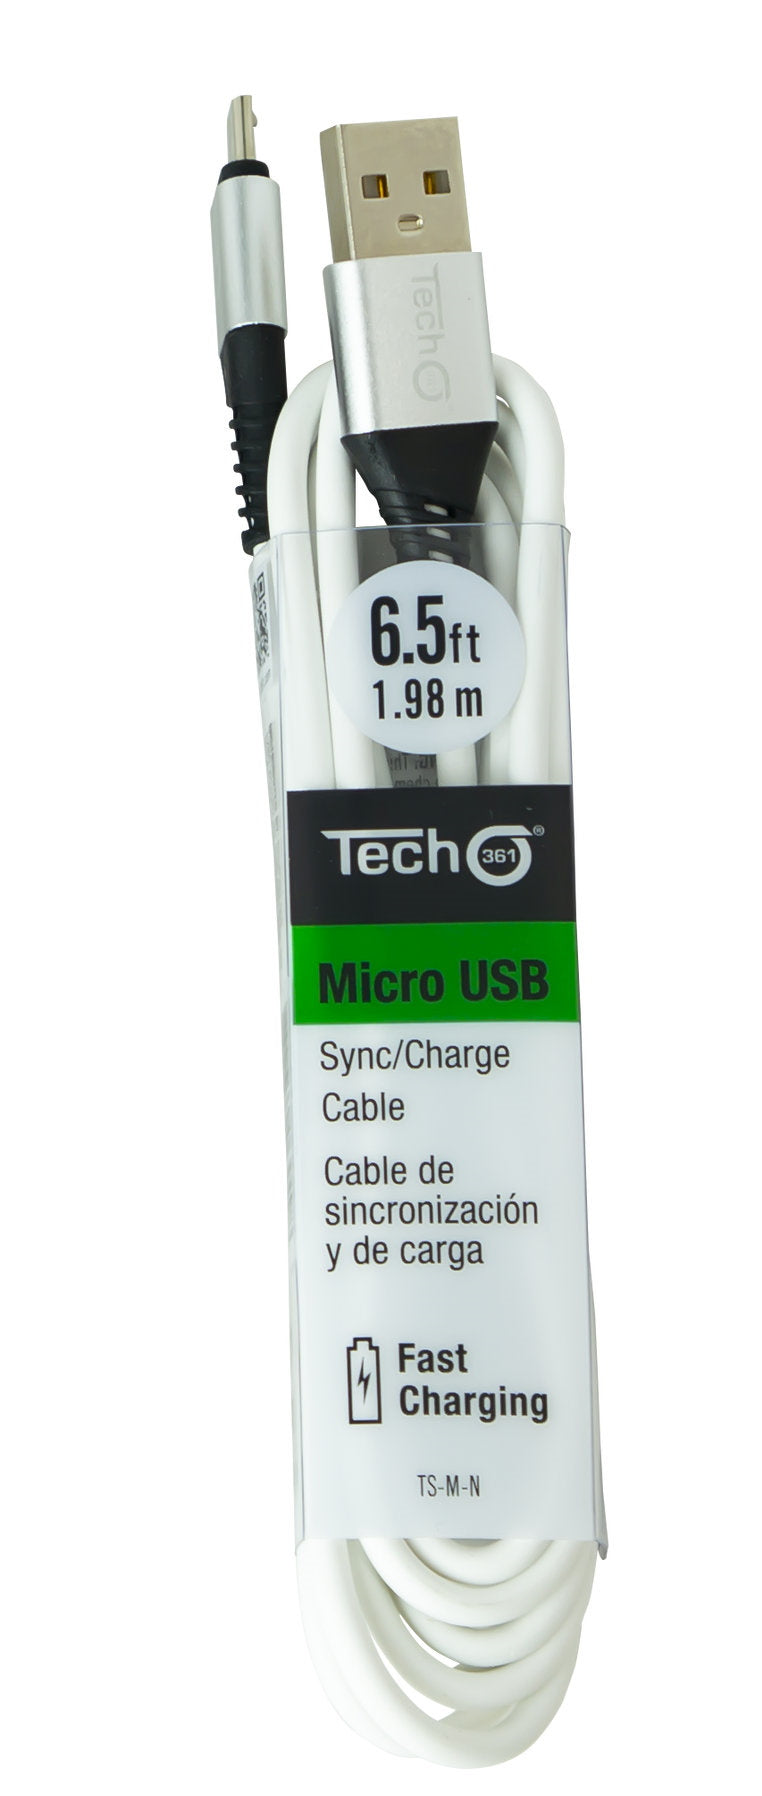 Micro USB 6.5 foot Sync/Charge Cable - White